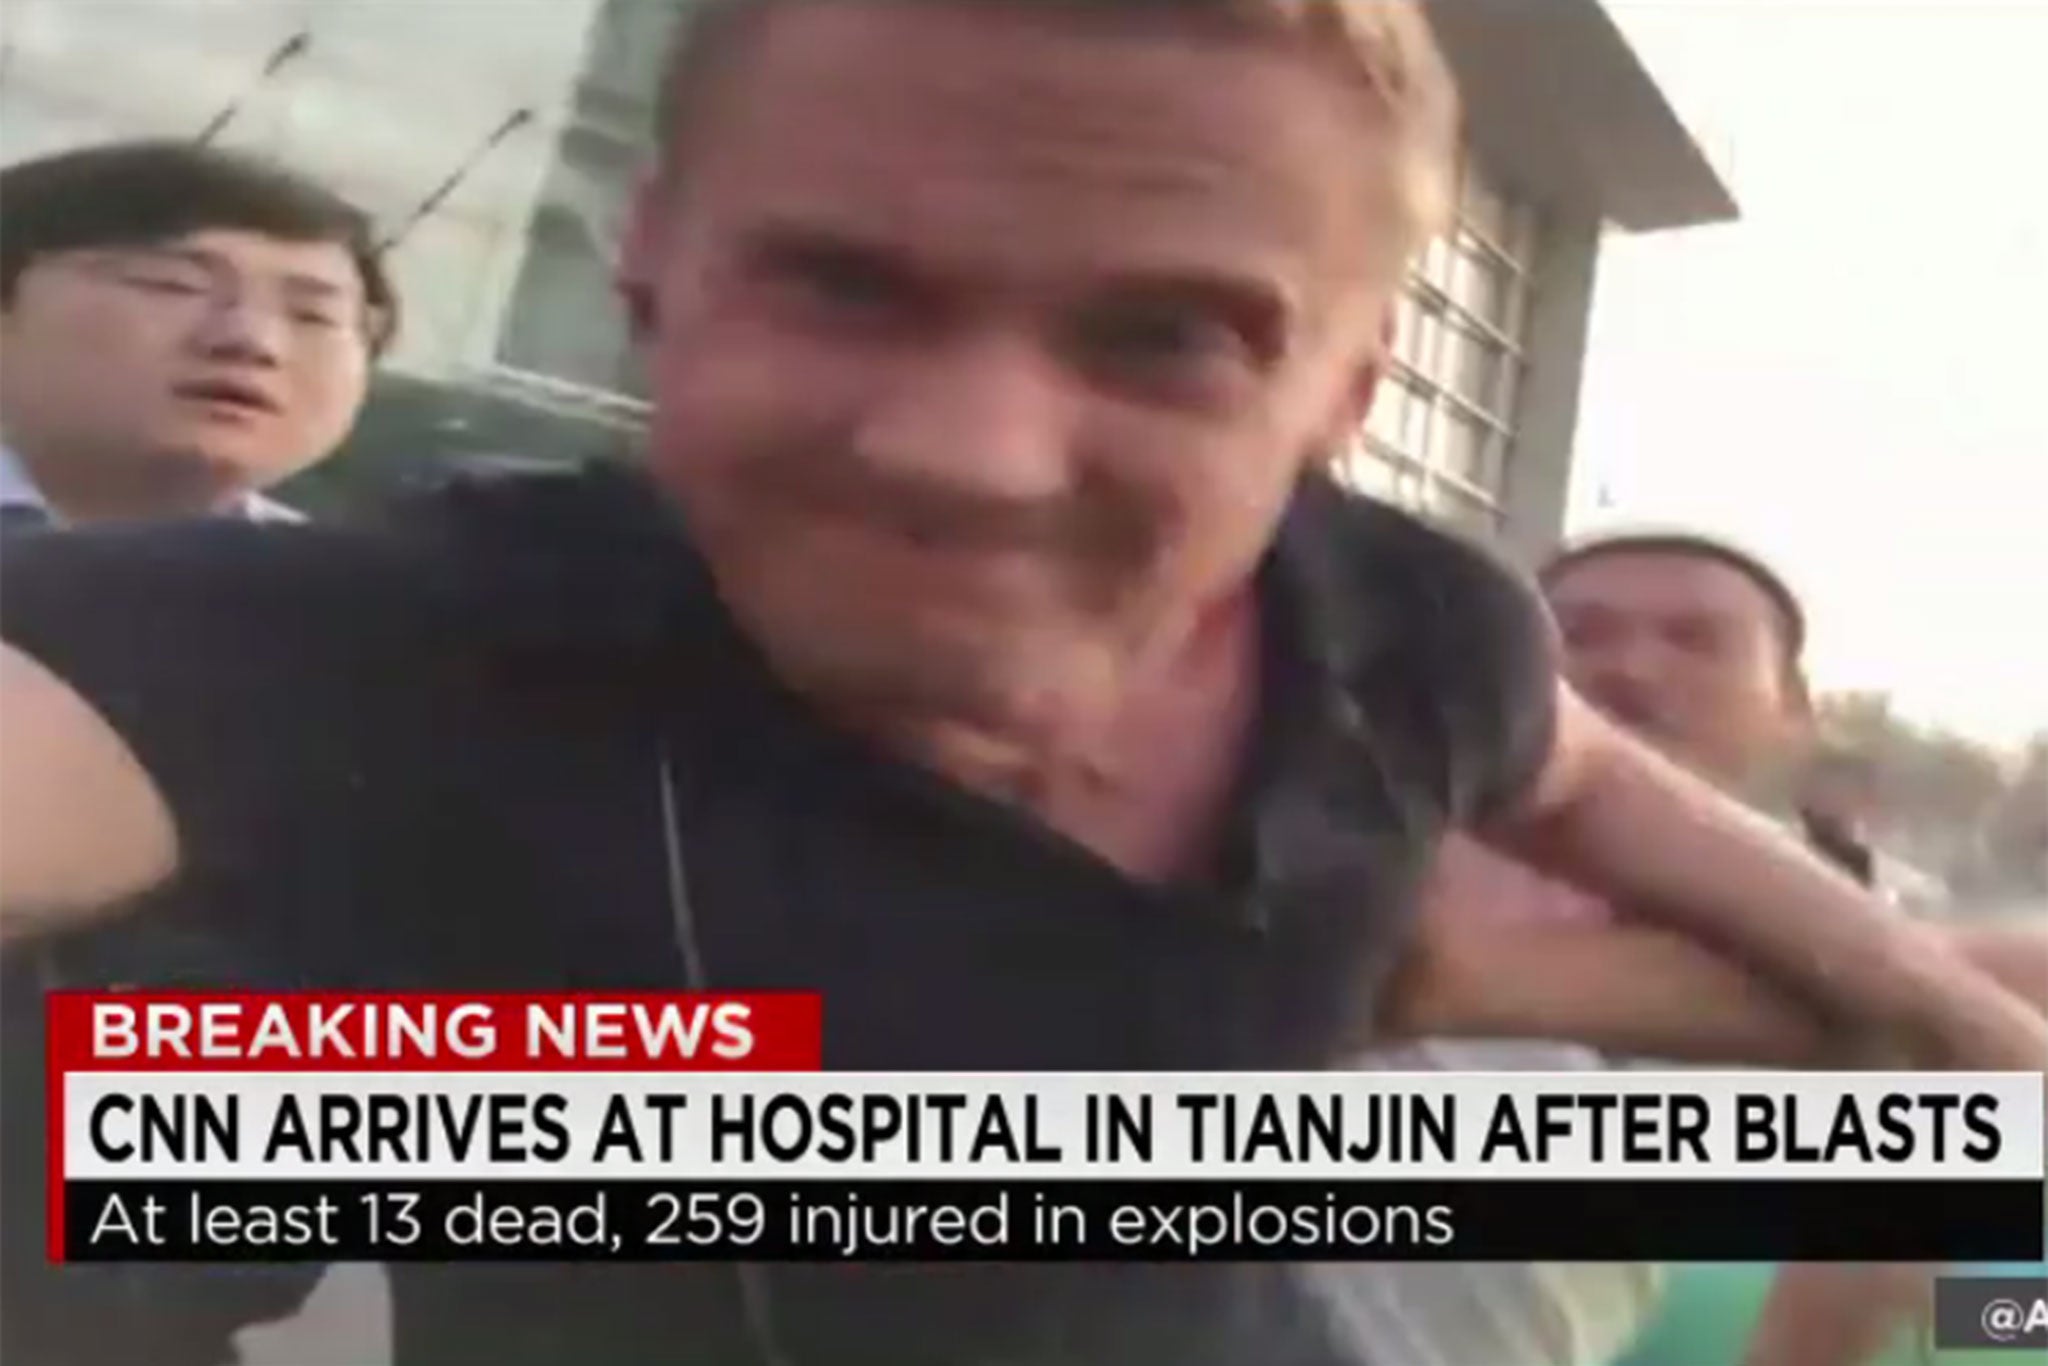 CNN's Will Ripley was accosted by angry locals outside a hospital where he was filming in Tianjin